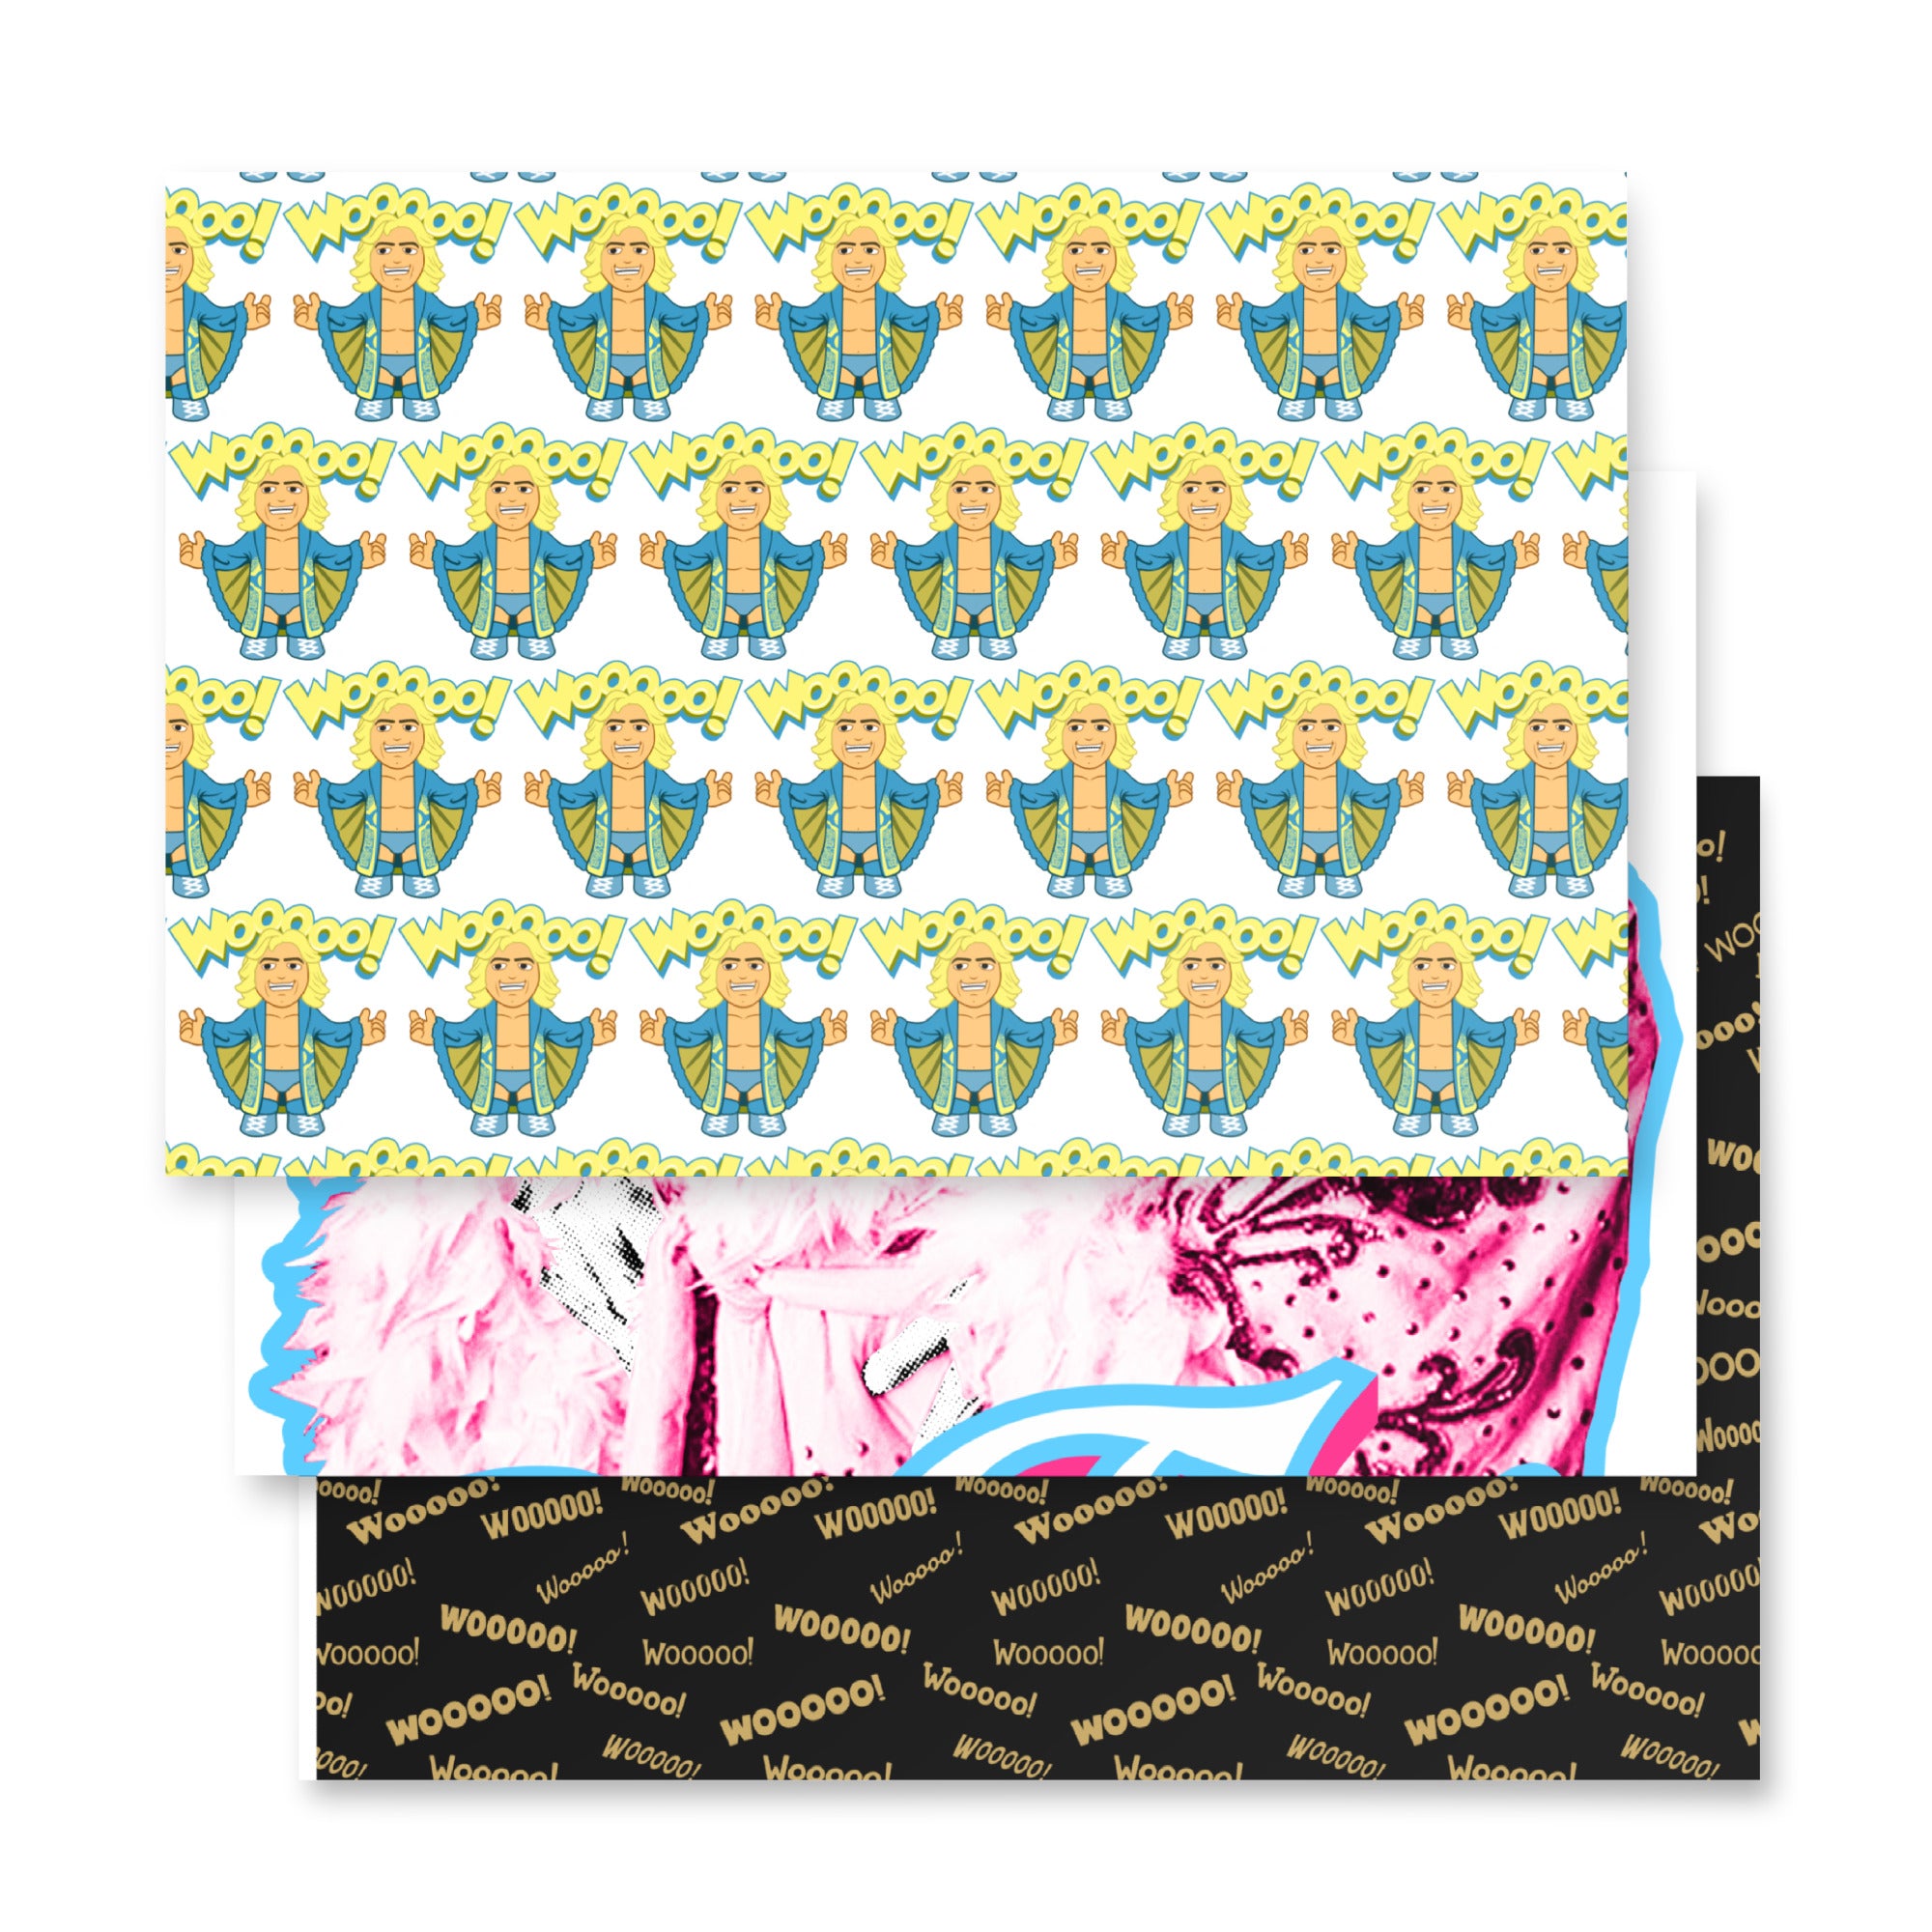 Wooooo! Package Wrapping paper sheets